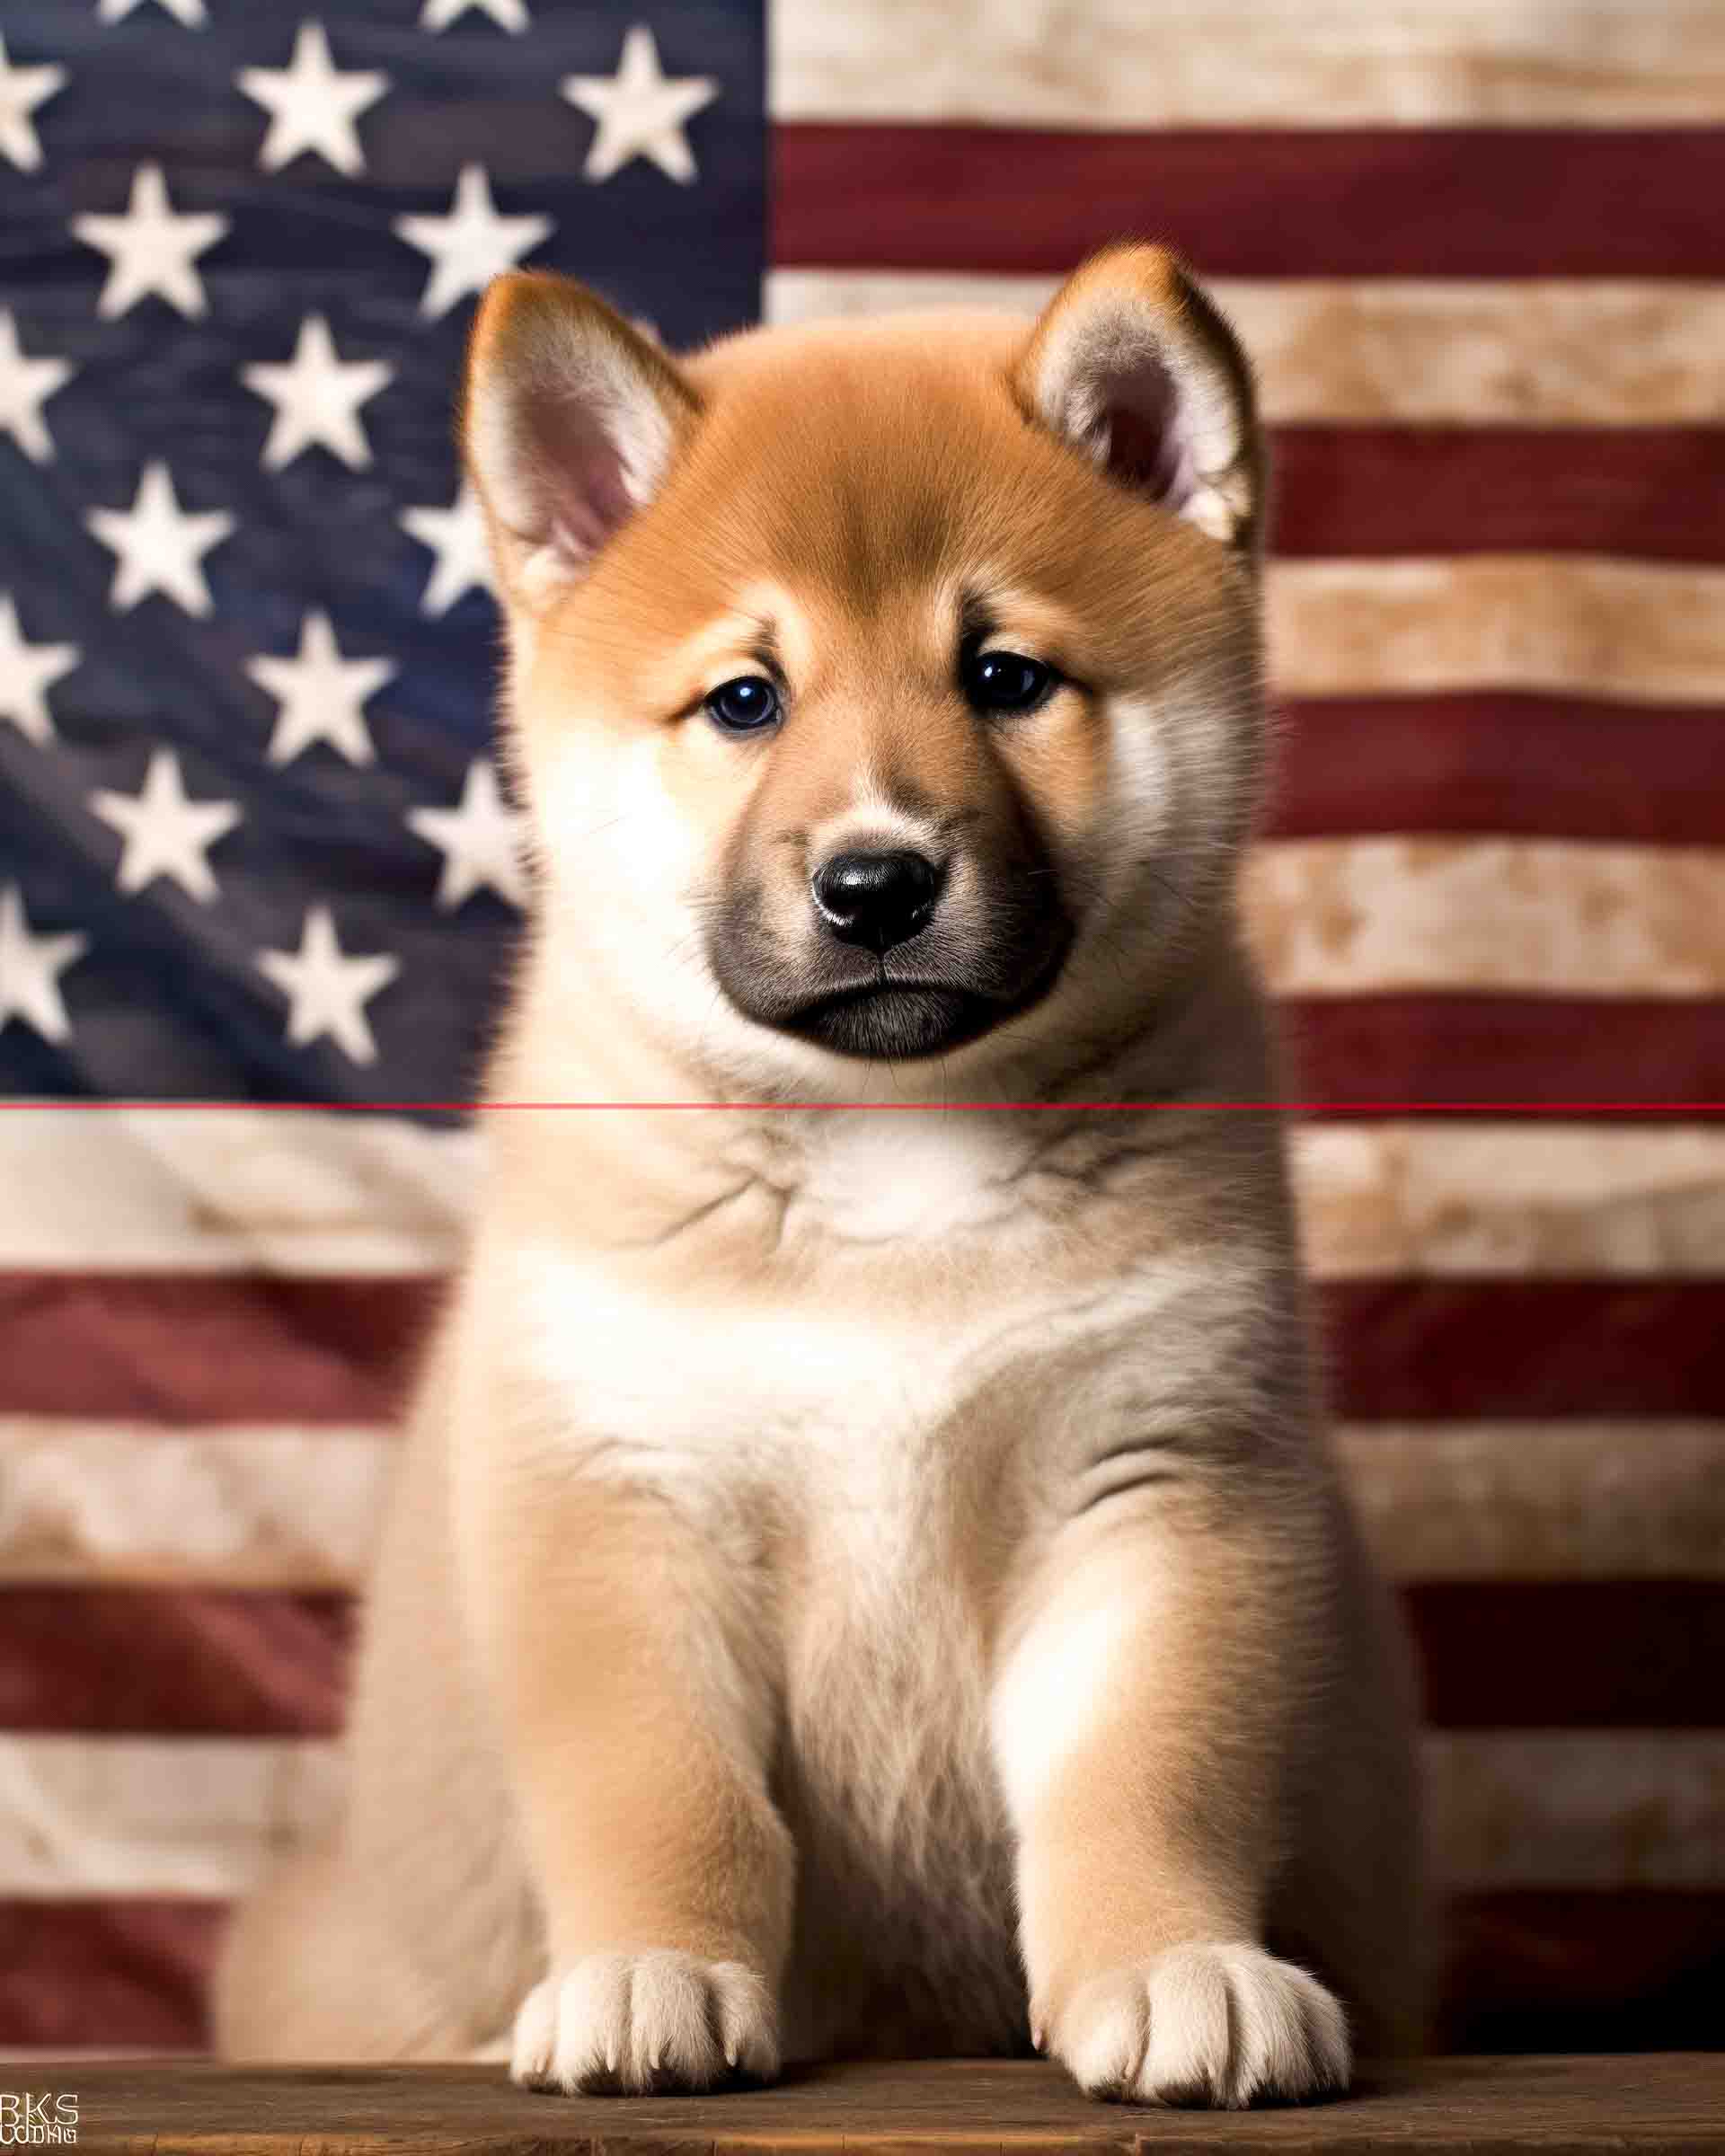 A picture of a shiba inu puppy sits in front of an american flag, looking directly at the viewer. The puppy has a thick dense fluffy reddish-brown and white coat, perky ears, and a soft, alert expression. The background features a vintage American flag.